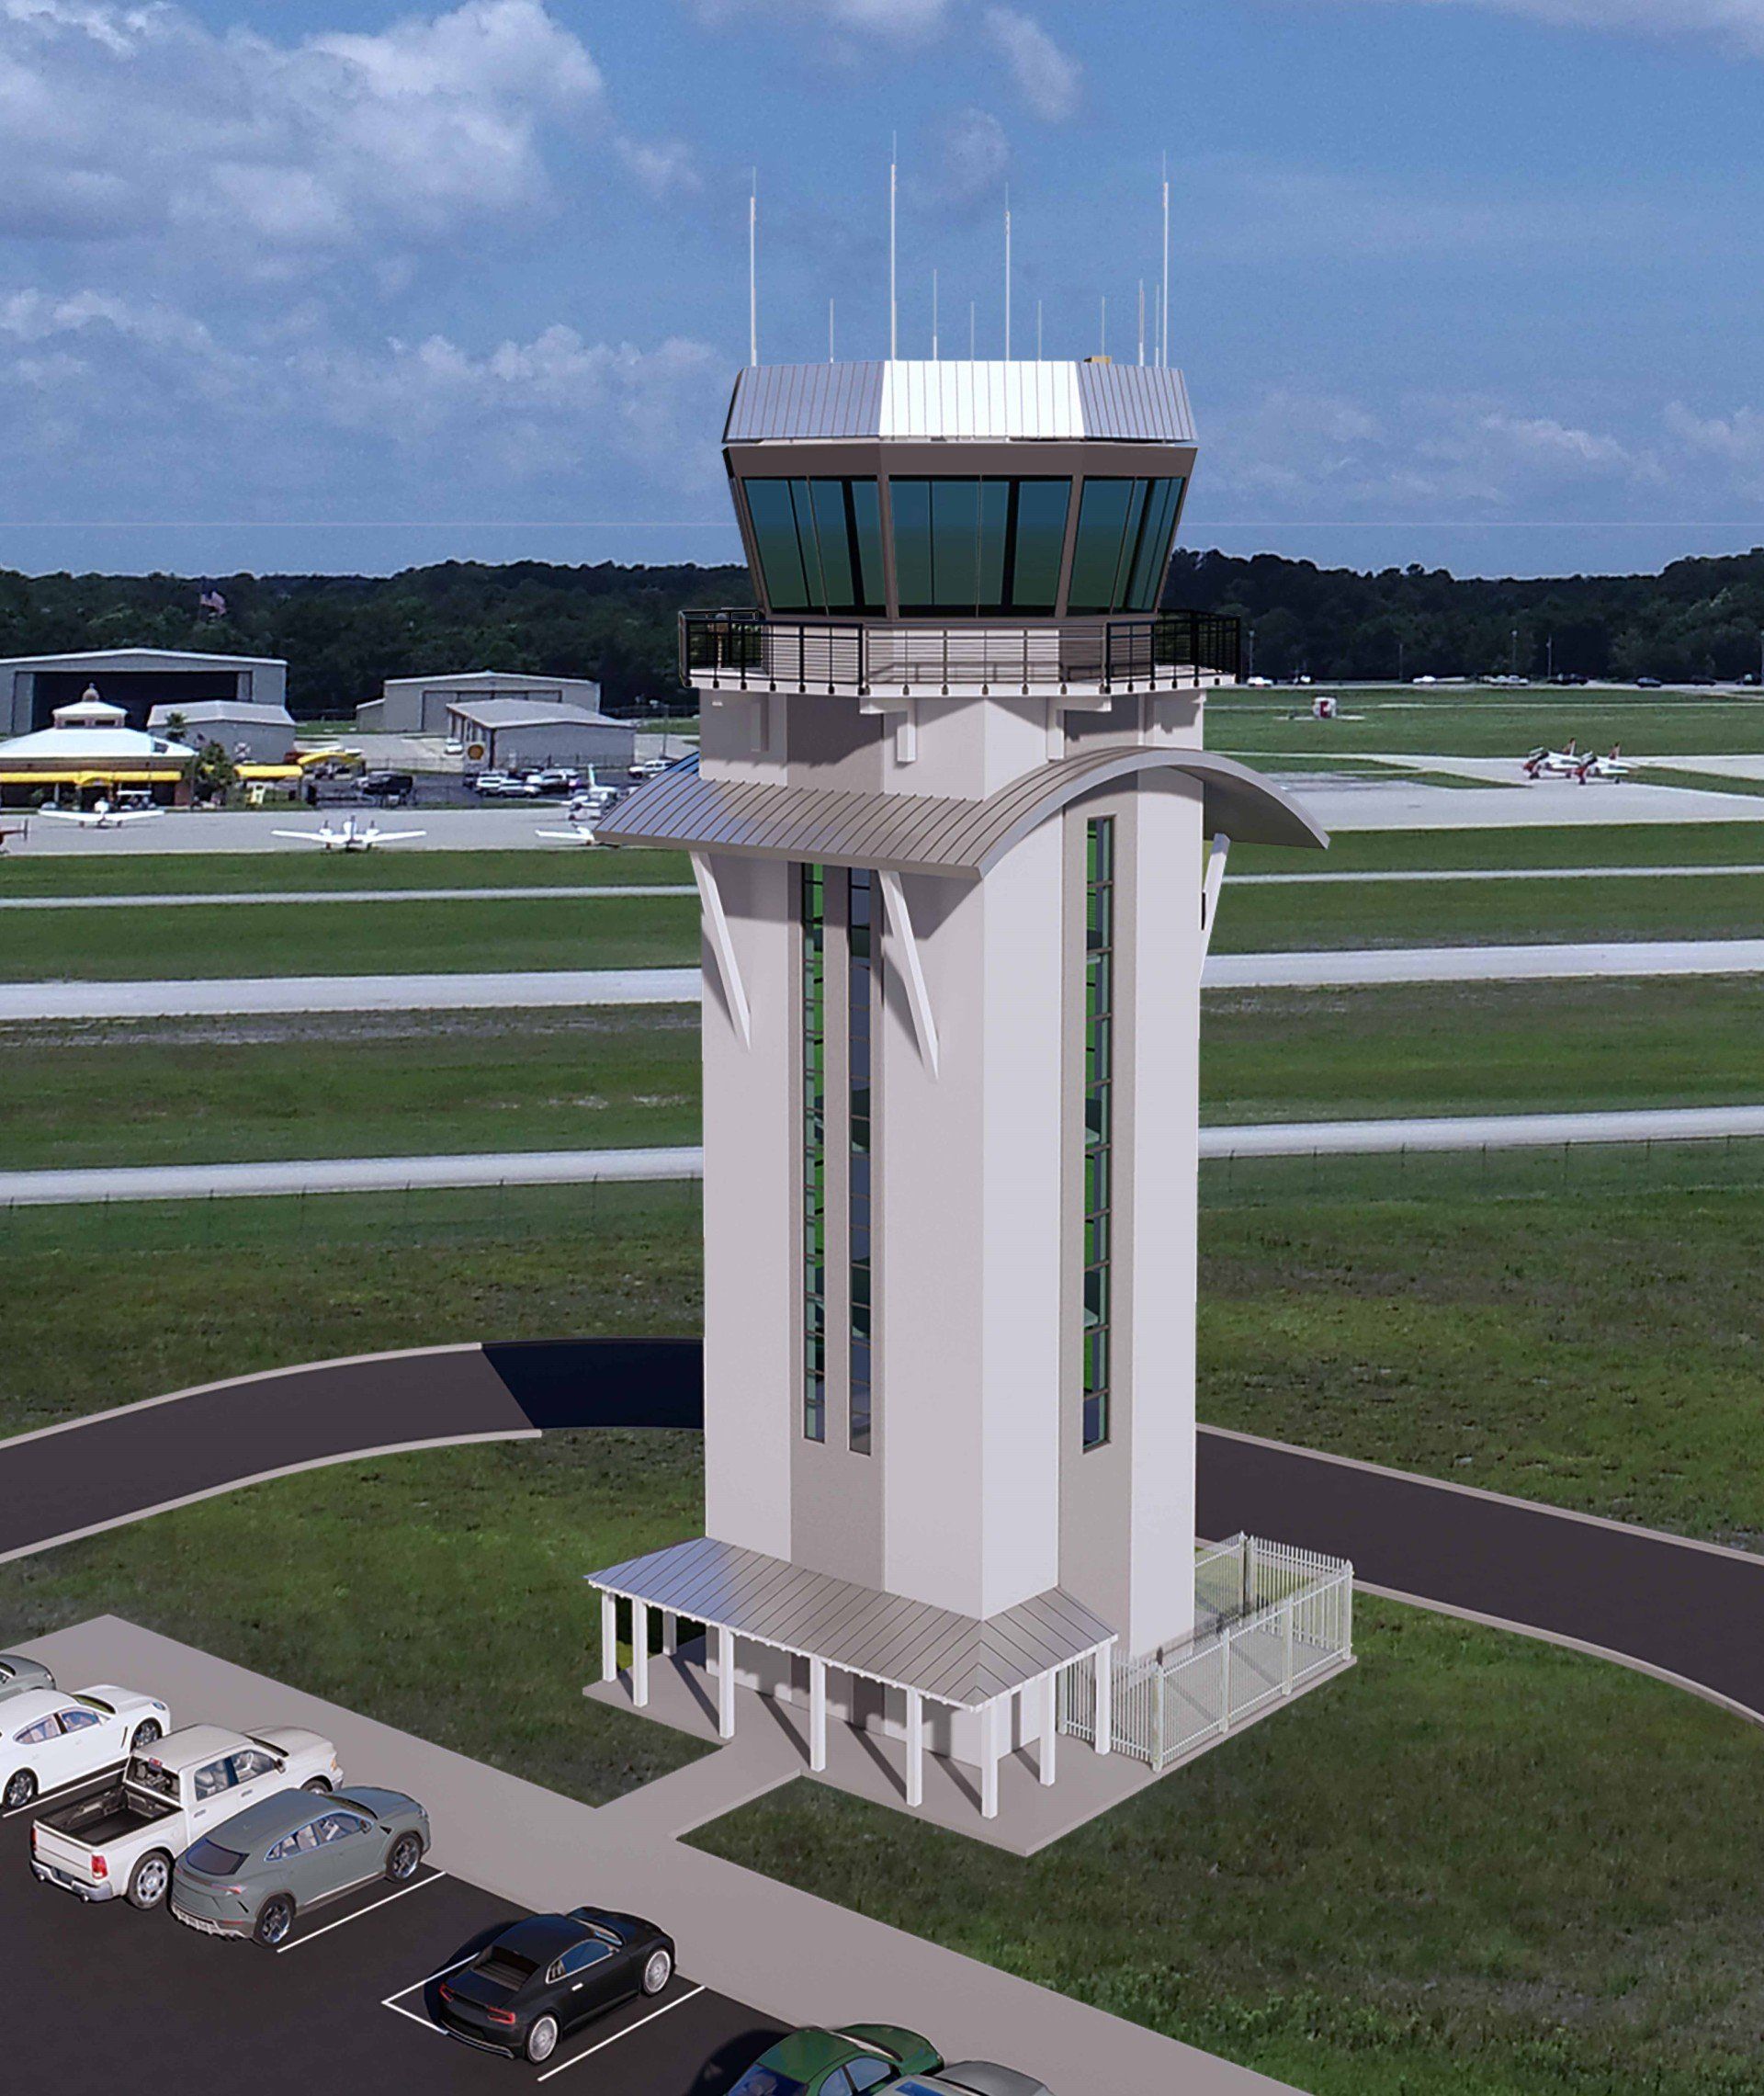 Rendering of a new air traffic control tower for Gulf Shores, Alabama's, airport.